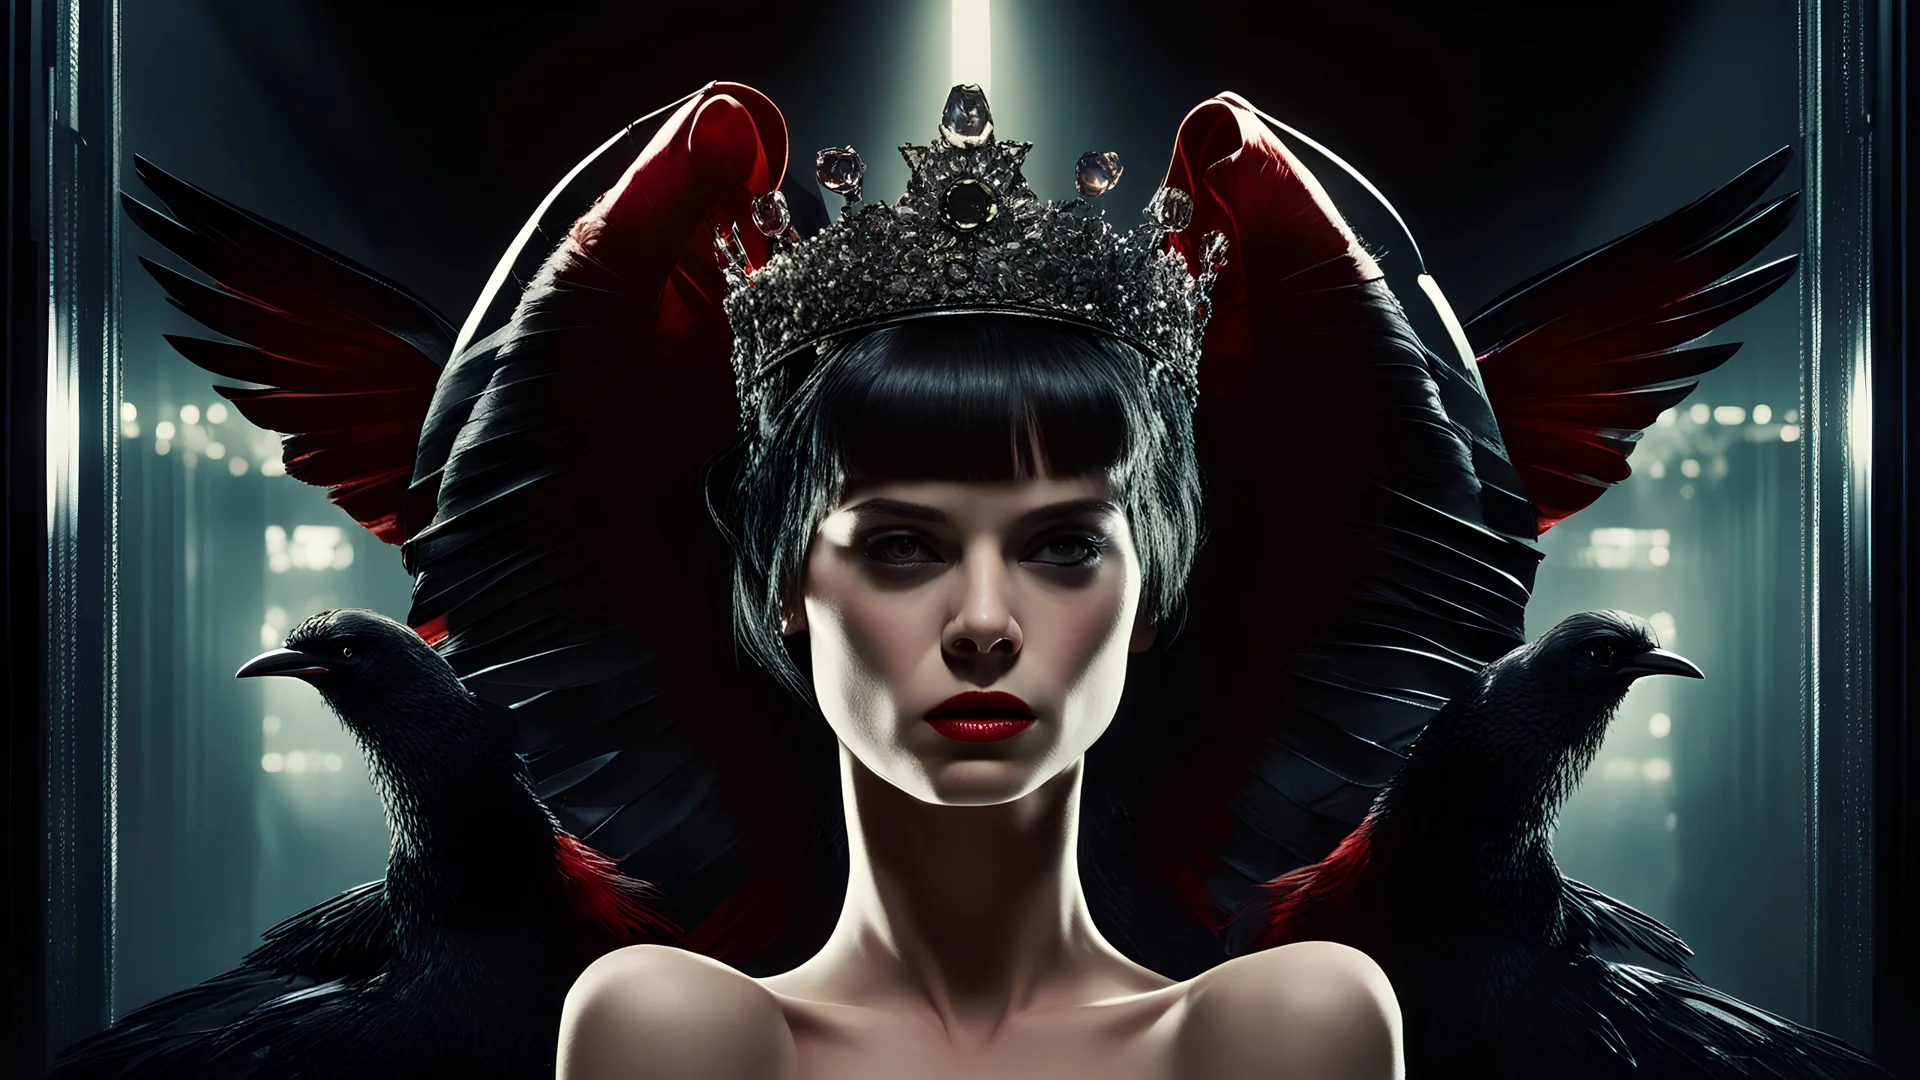 high resolution, best quality, cinematic shot, , full body shot wide angle, blade runner, blonde woman in red , with a black crow on her shoulder, the woman has got a crystal white crown on her head. stars are reflecting in the glass crown